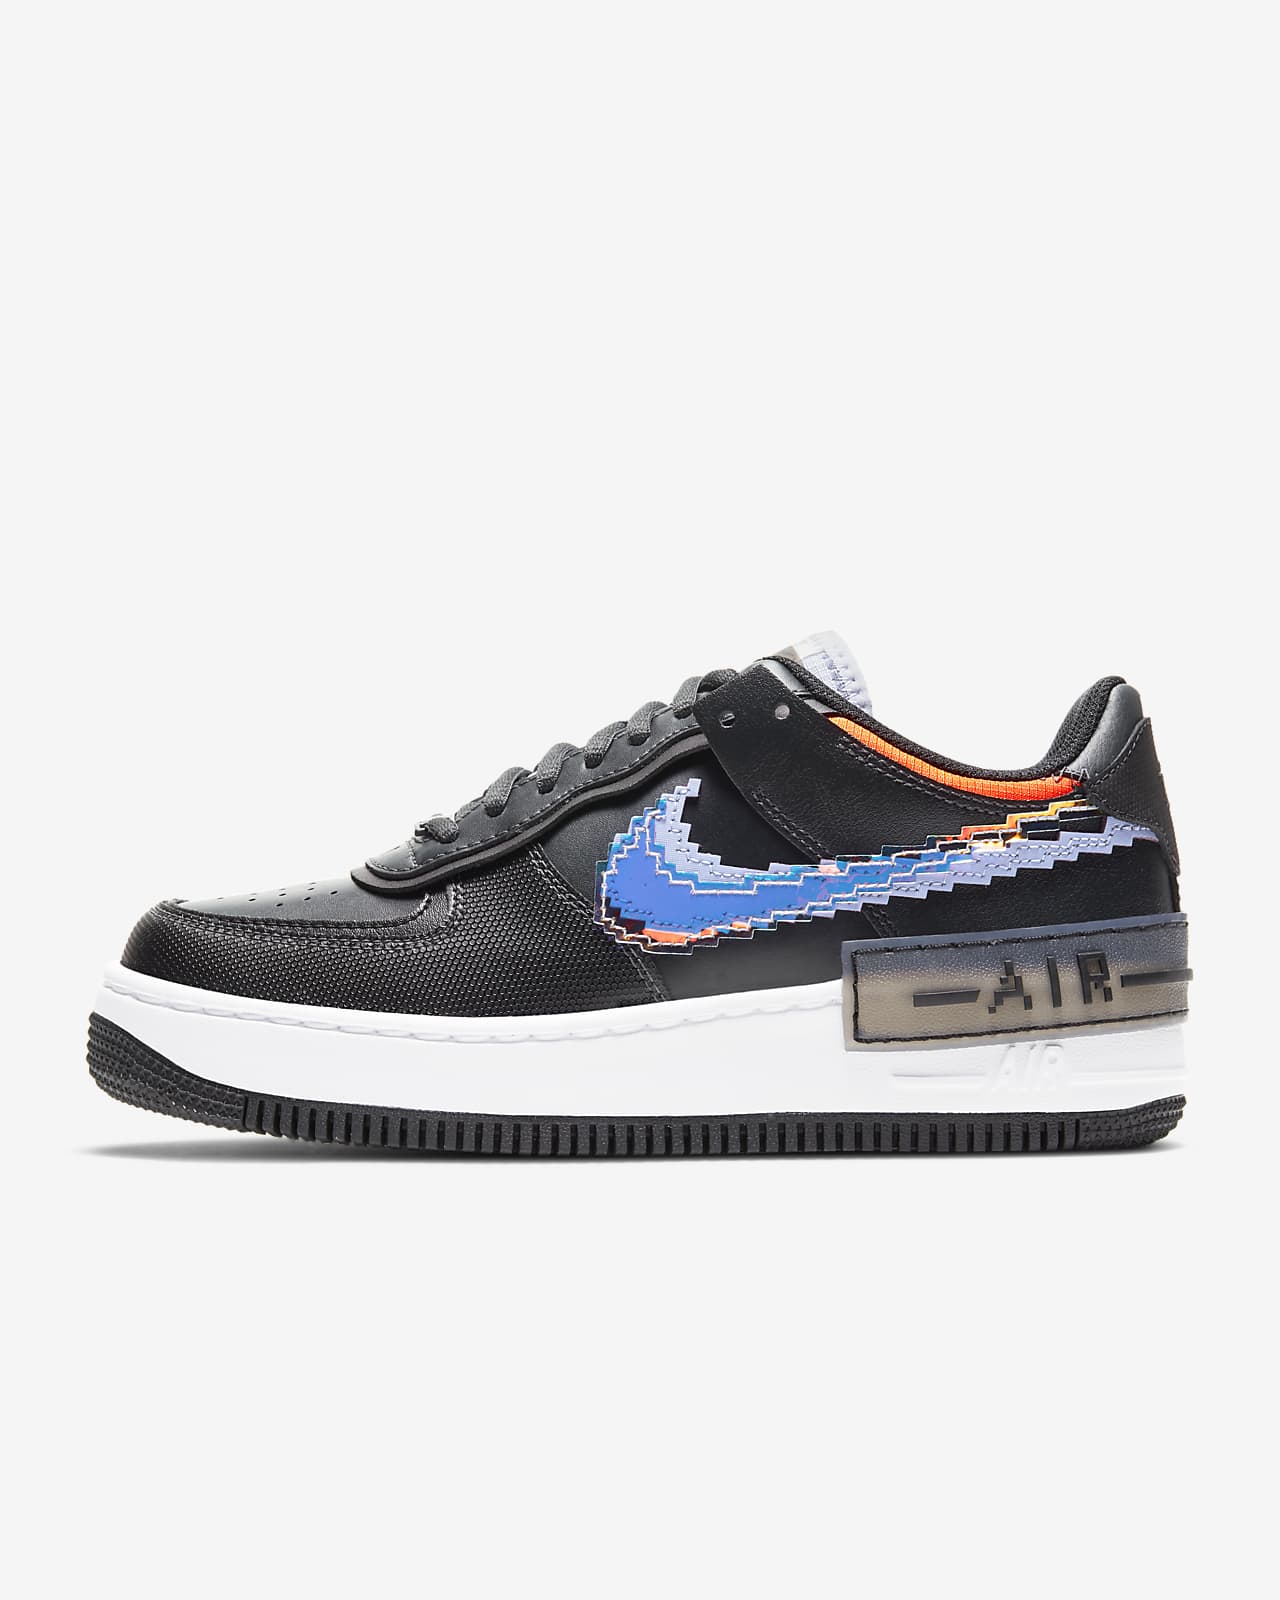 nike air force 1 shadow size 8